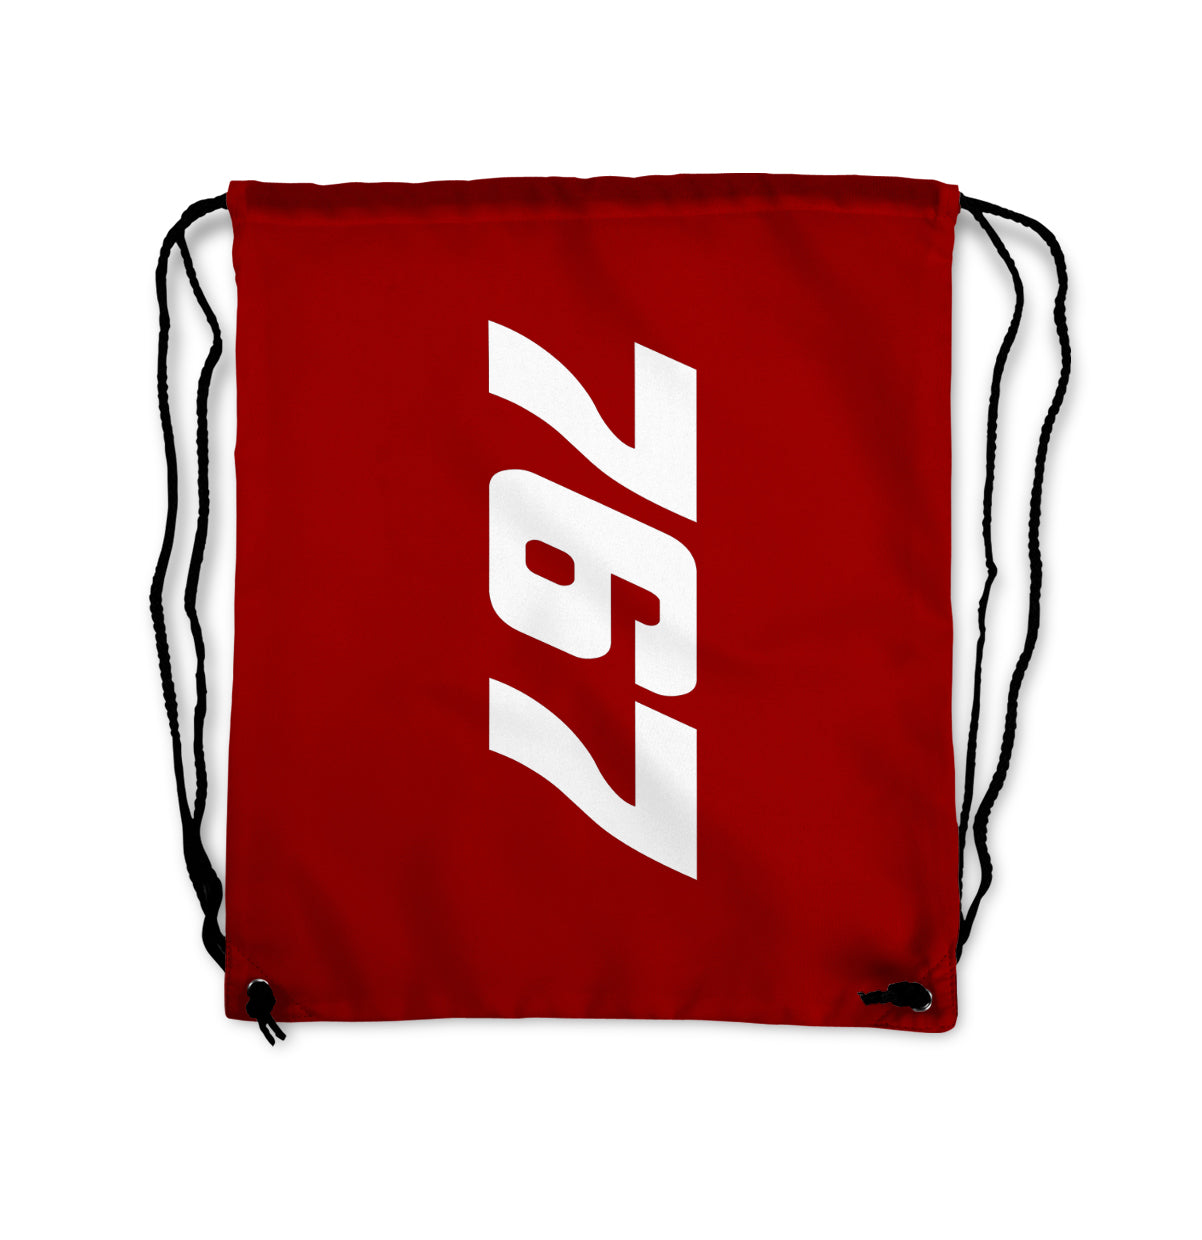 Boeing 767 Text Designed Drawstring Bags